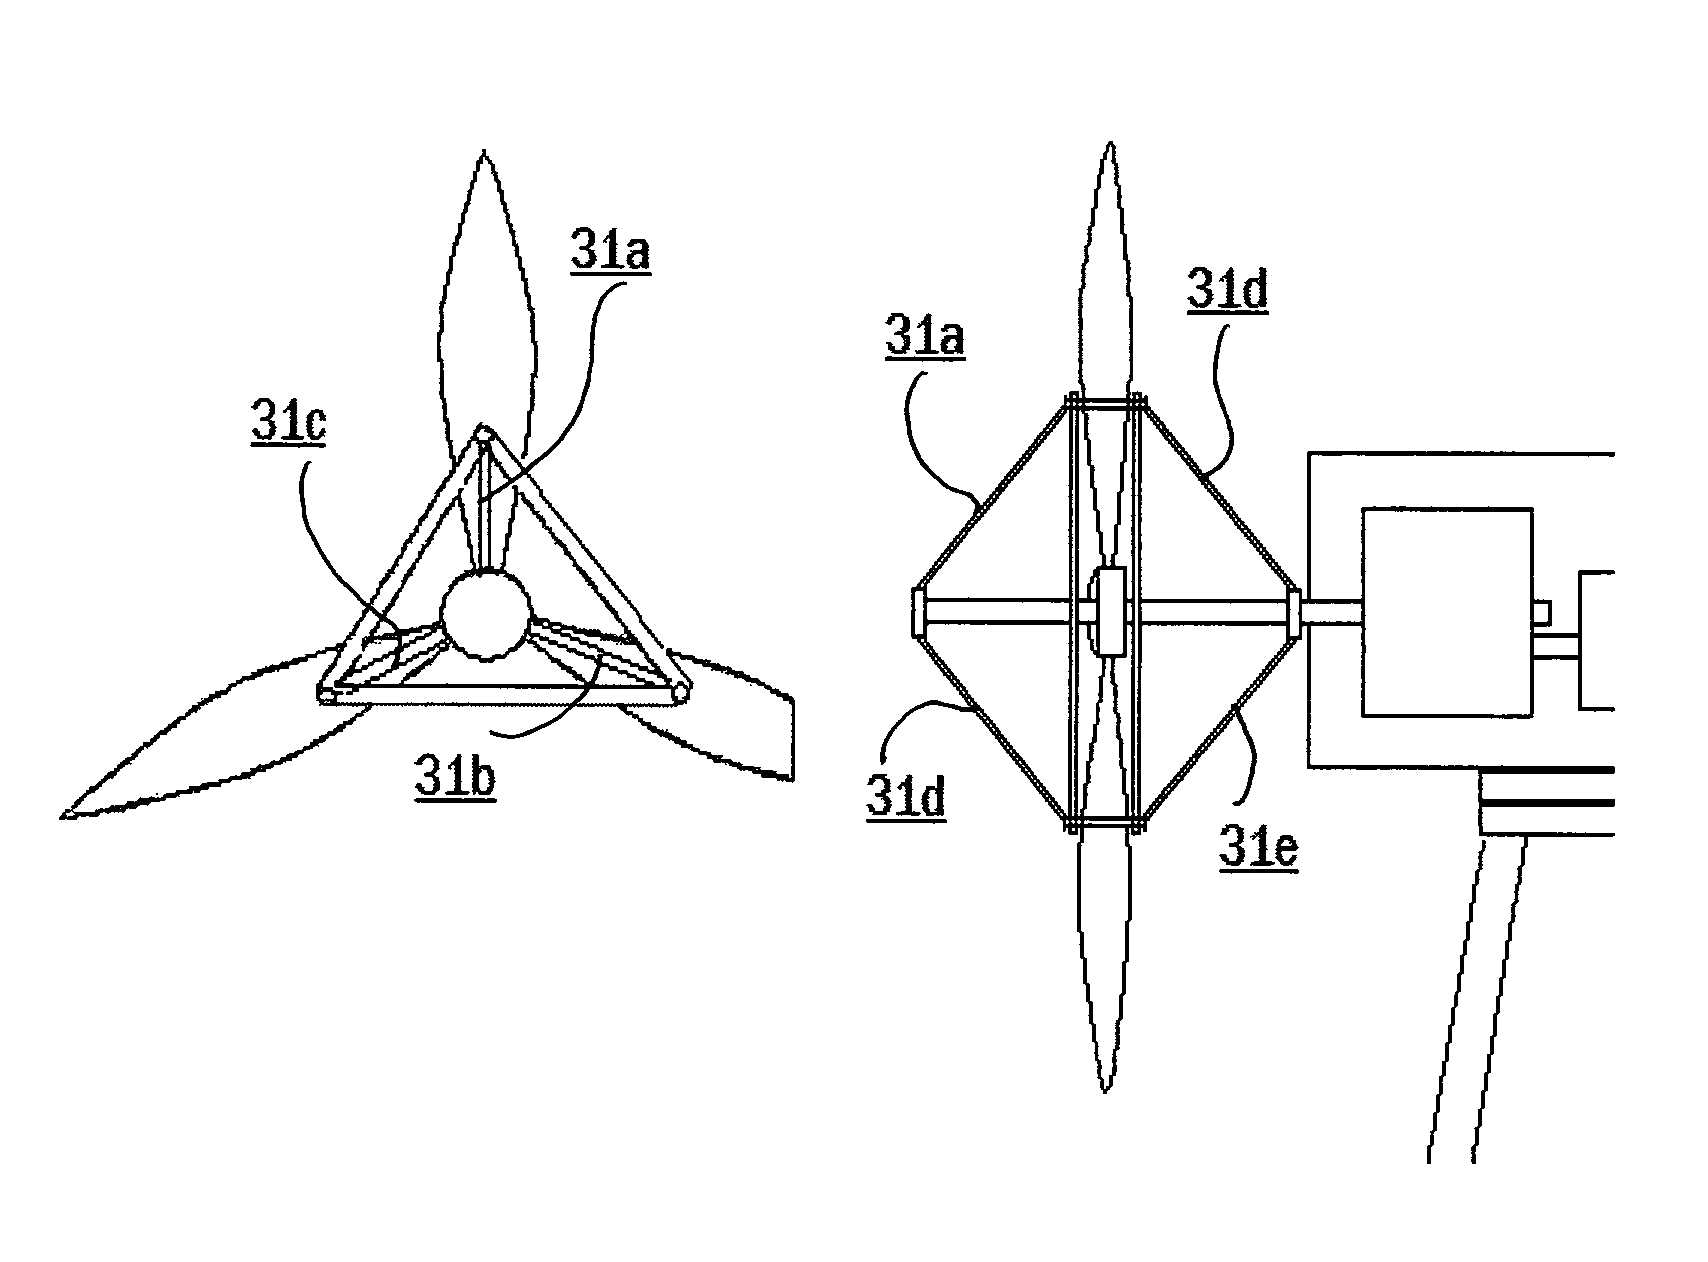 Wind turbine blades with reinforcing, supporting and stabilizing components and enlarged swept area